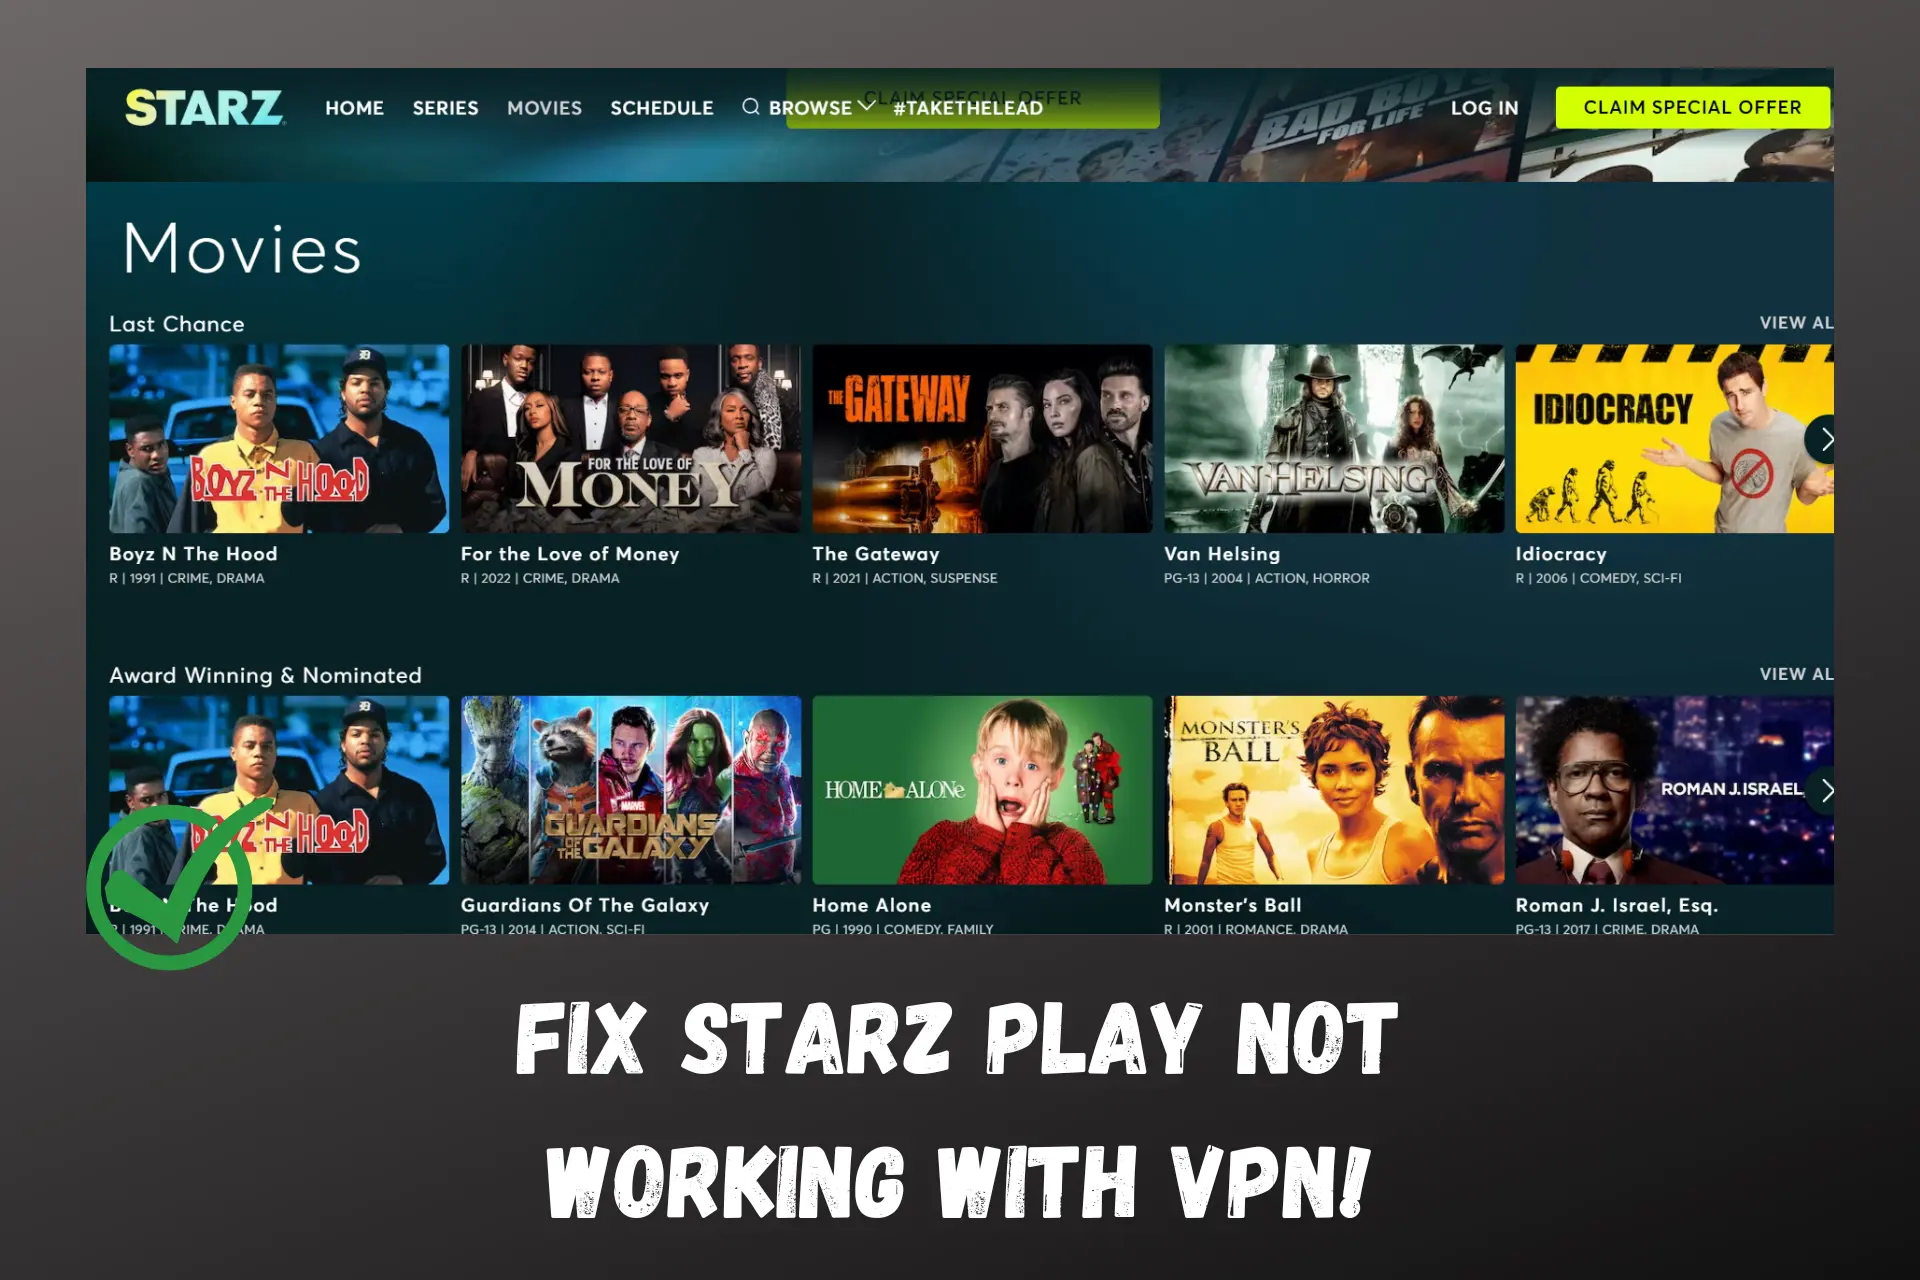 starz play not working with vpn